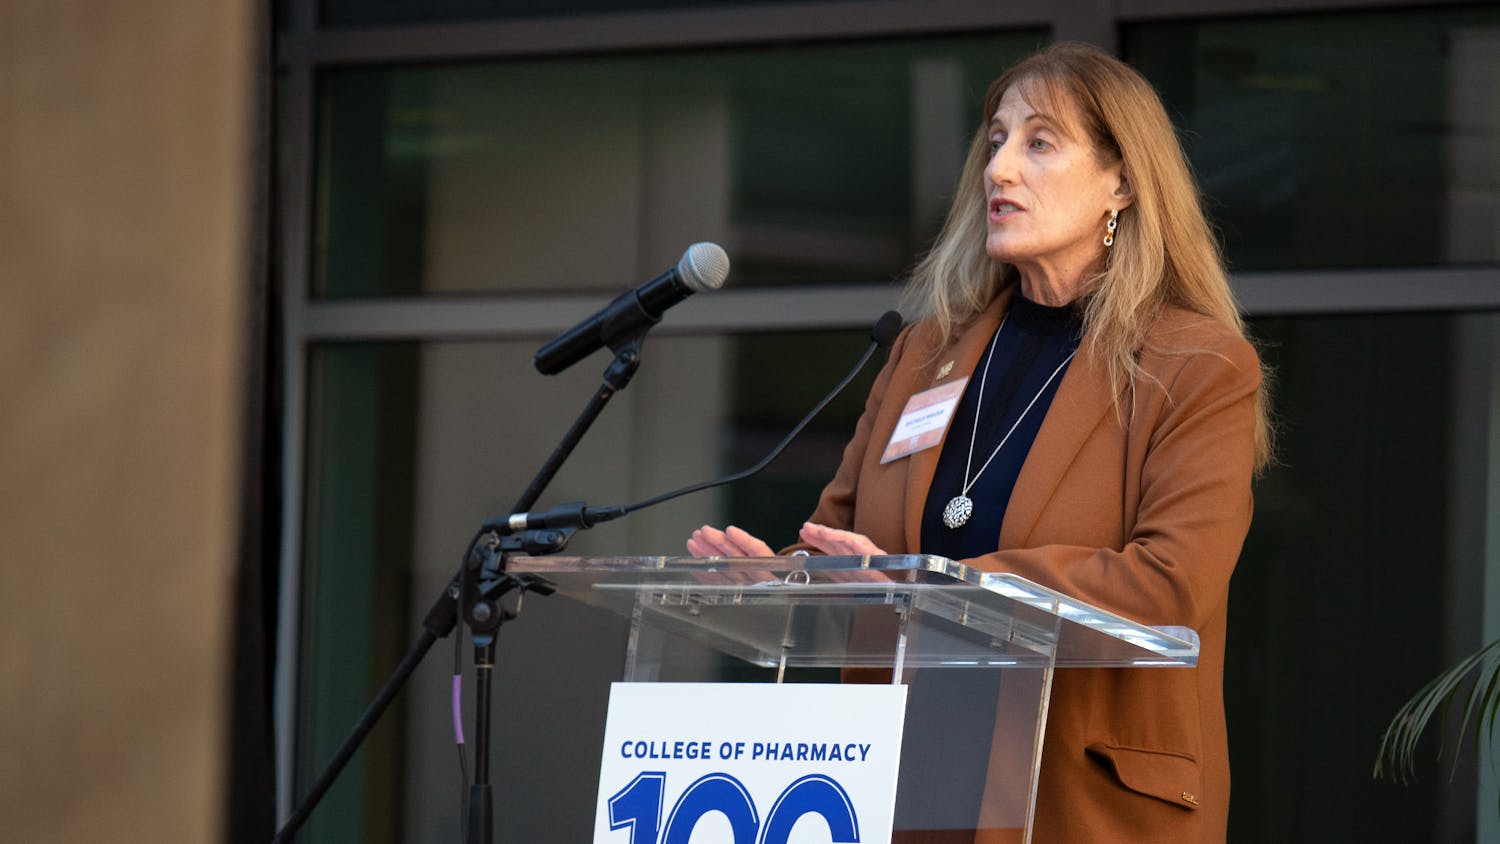 Michele Weizer, the division director of pharmacy operations for HCA East Florida, gives an address to the audience of faculty, students and supporters for the UF College of Pharmacy Centennial Kickoff celebration Thursday, Jan. 26, 2023.